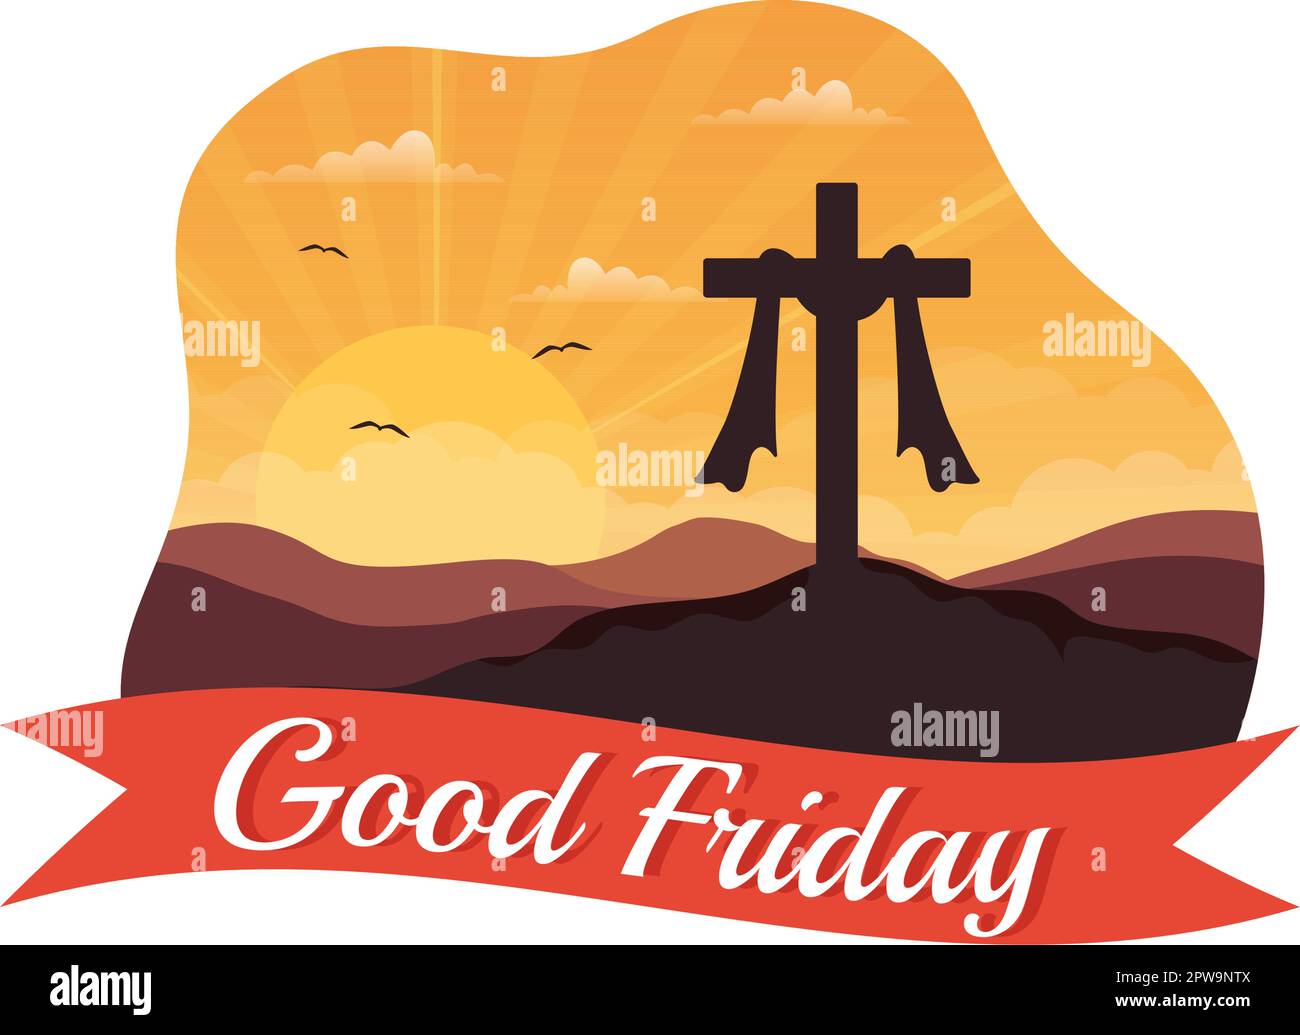 Happy Good Friday Illustration with Christian Holiday of Jesus Christ Crucifixion in Flat Cartoon Hand Drawn for Web Banner or Landing Page Templates Stock Vector